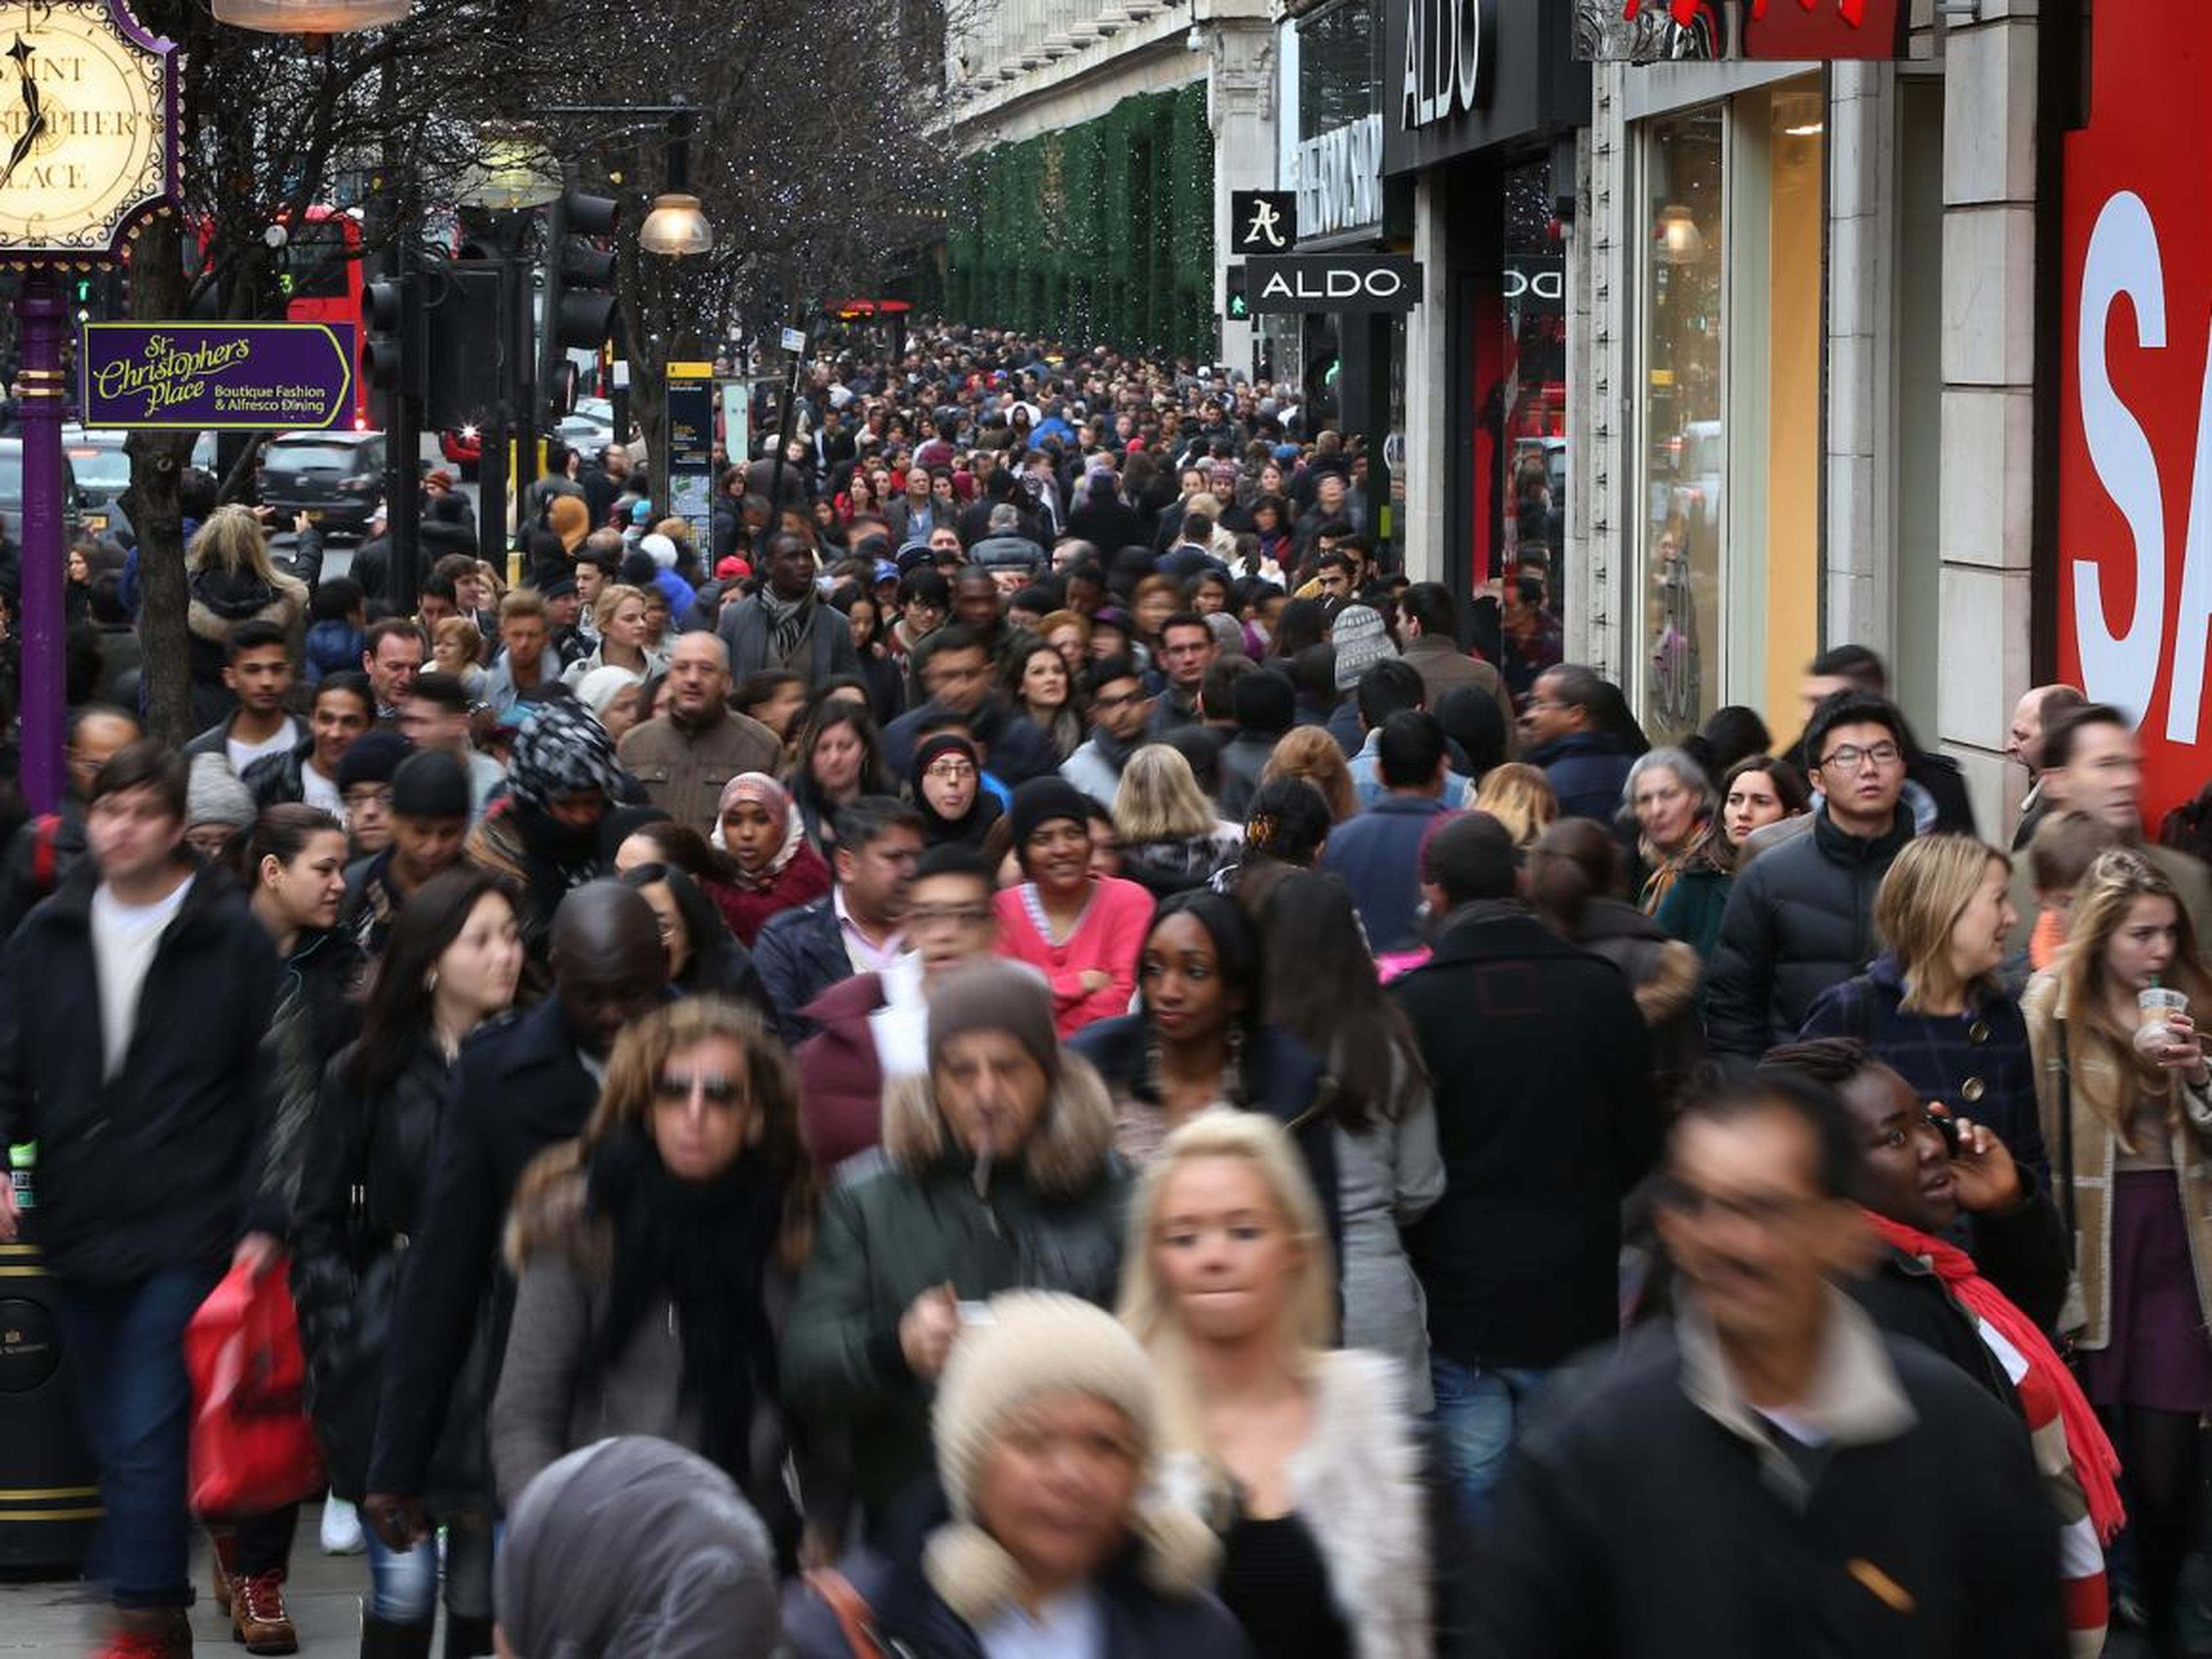 One American tourist shopping in the UK on Boxing Day even told The Mirror that the scene was "really a madhouse compared to the United States. I don't think we have this at all."